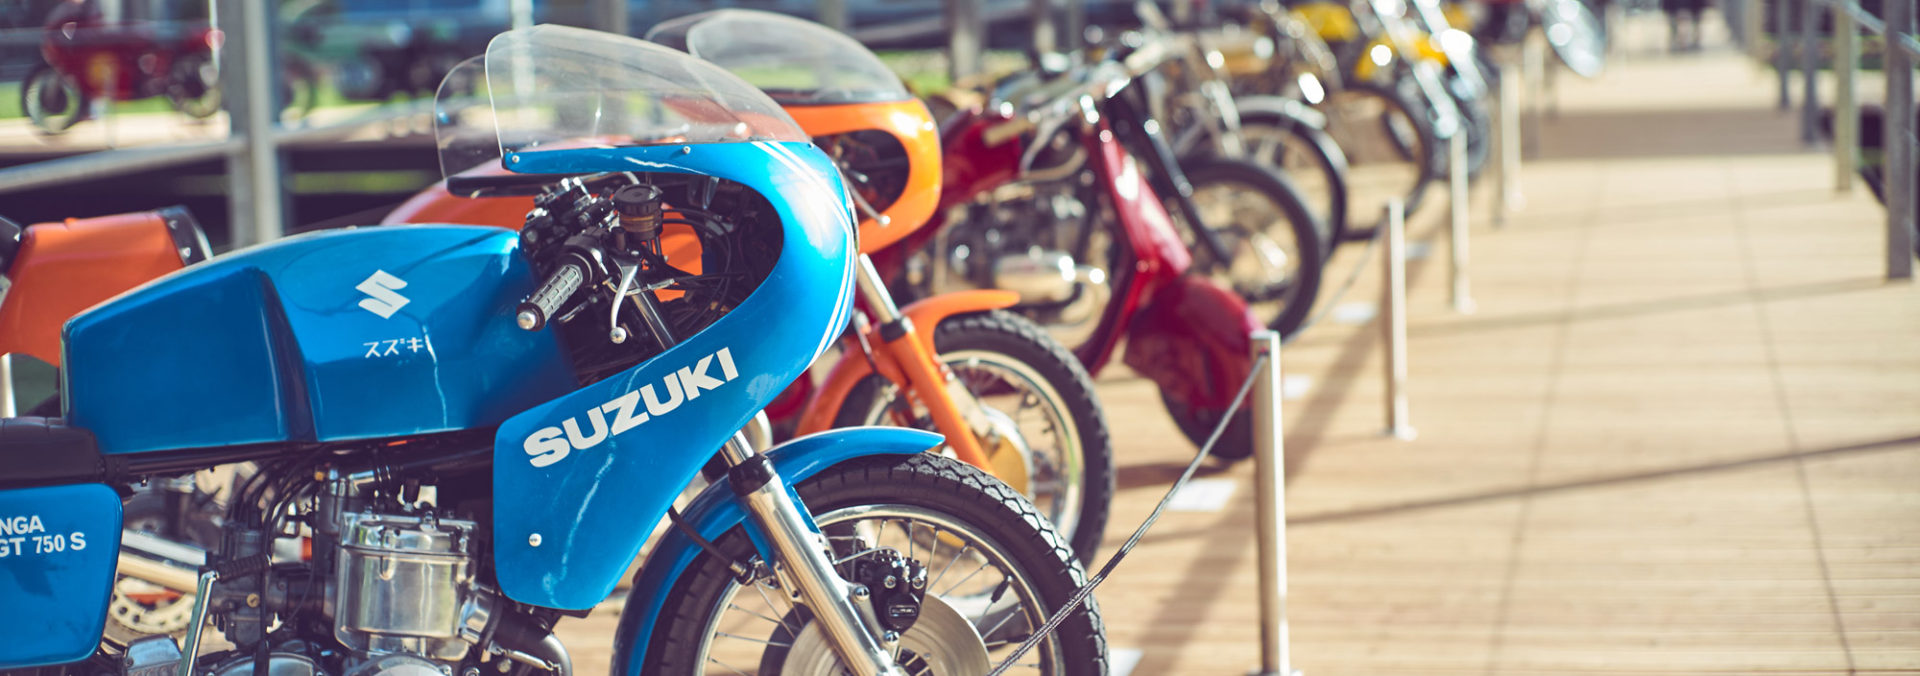 Motorcycle Concours